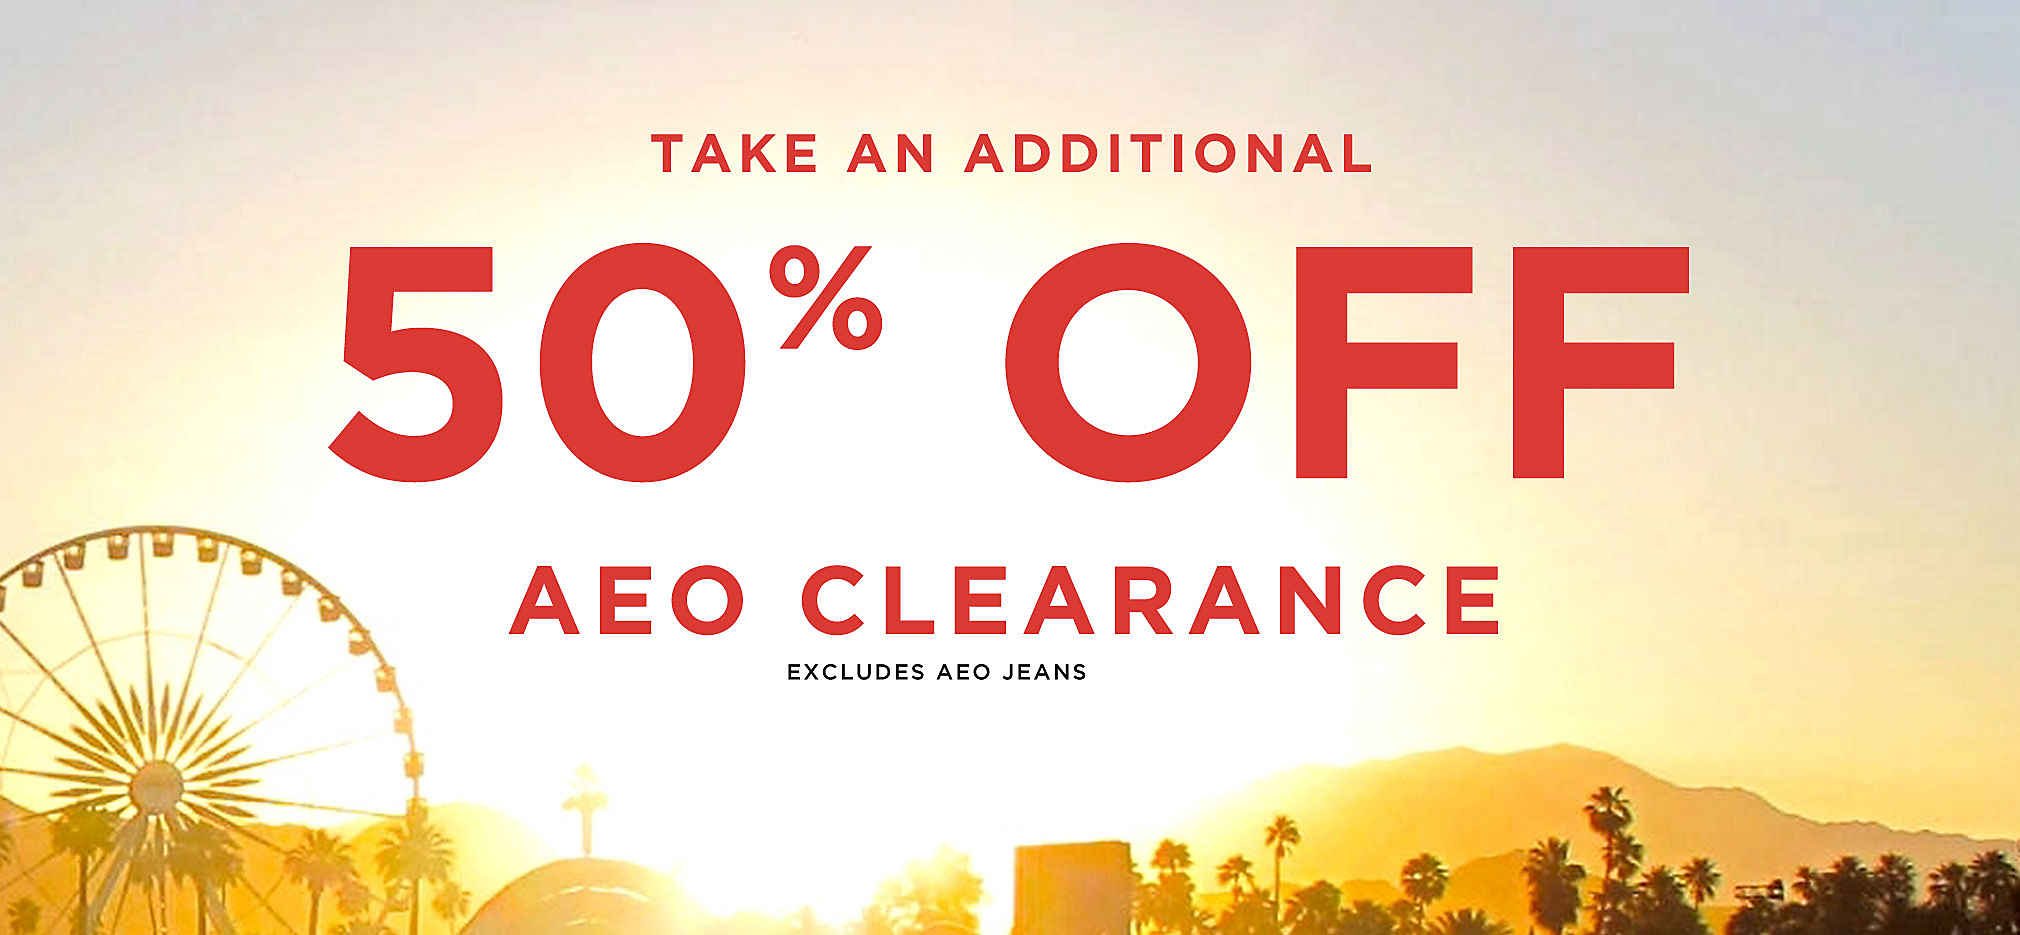 american eagle 50 off clearance